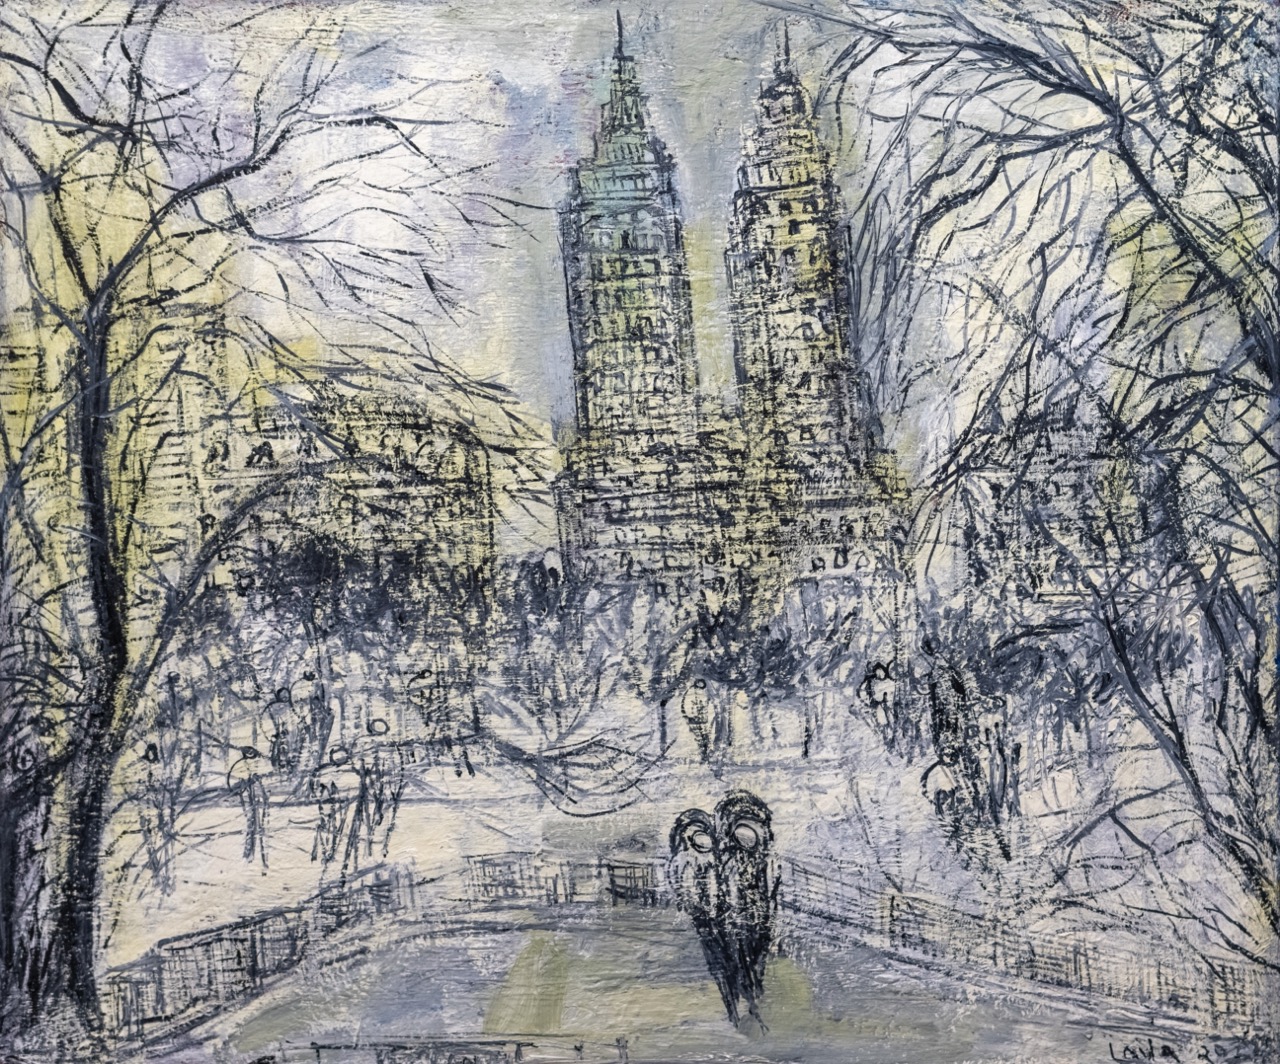 Winter in Central Park - NY -Opus 2023